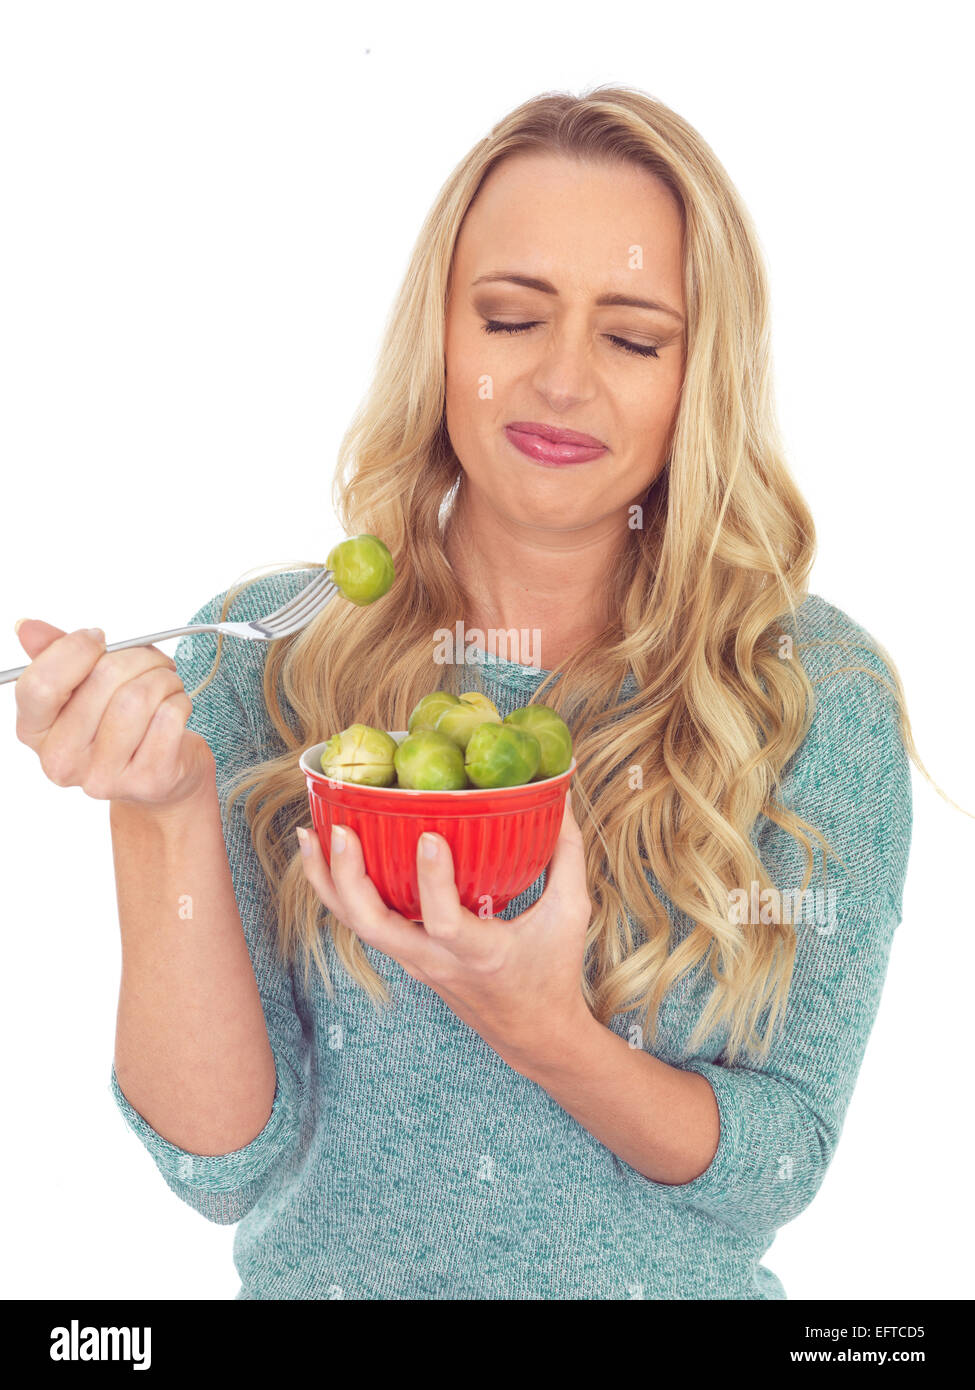 Attractive Young Woman Holding a Bowl of Brussels Sprouts Stock Photo